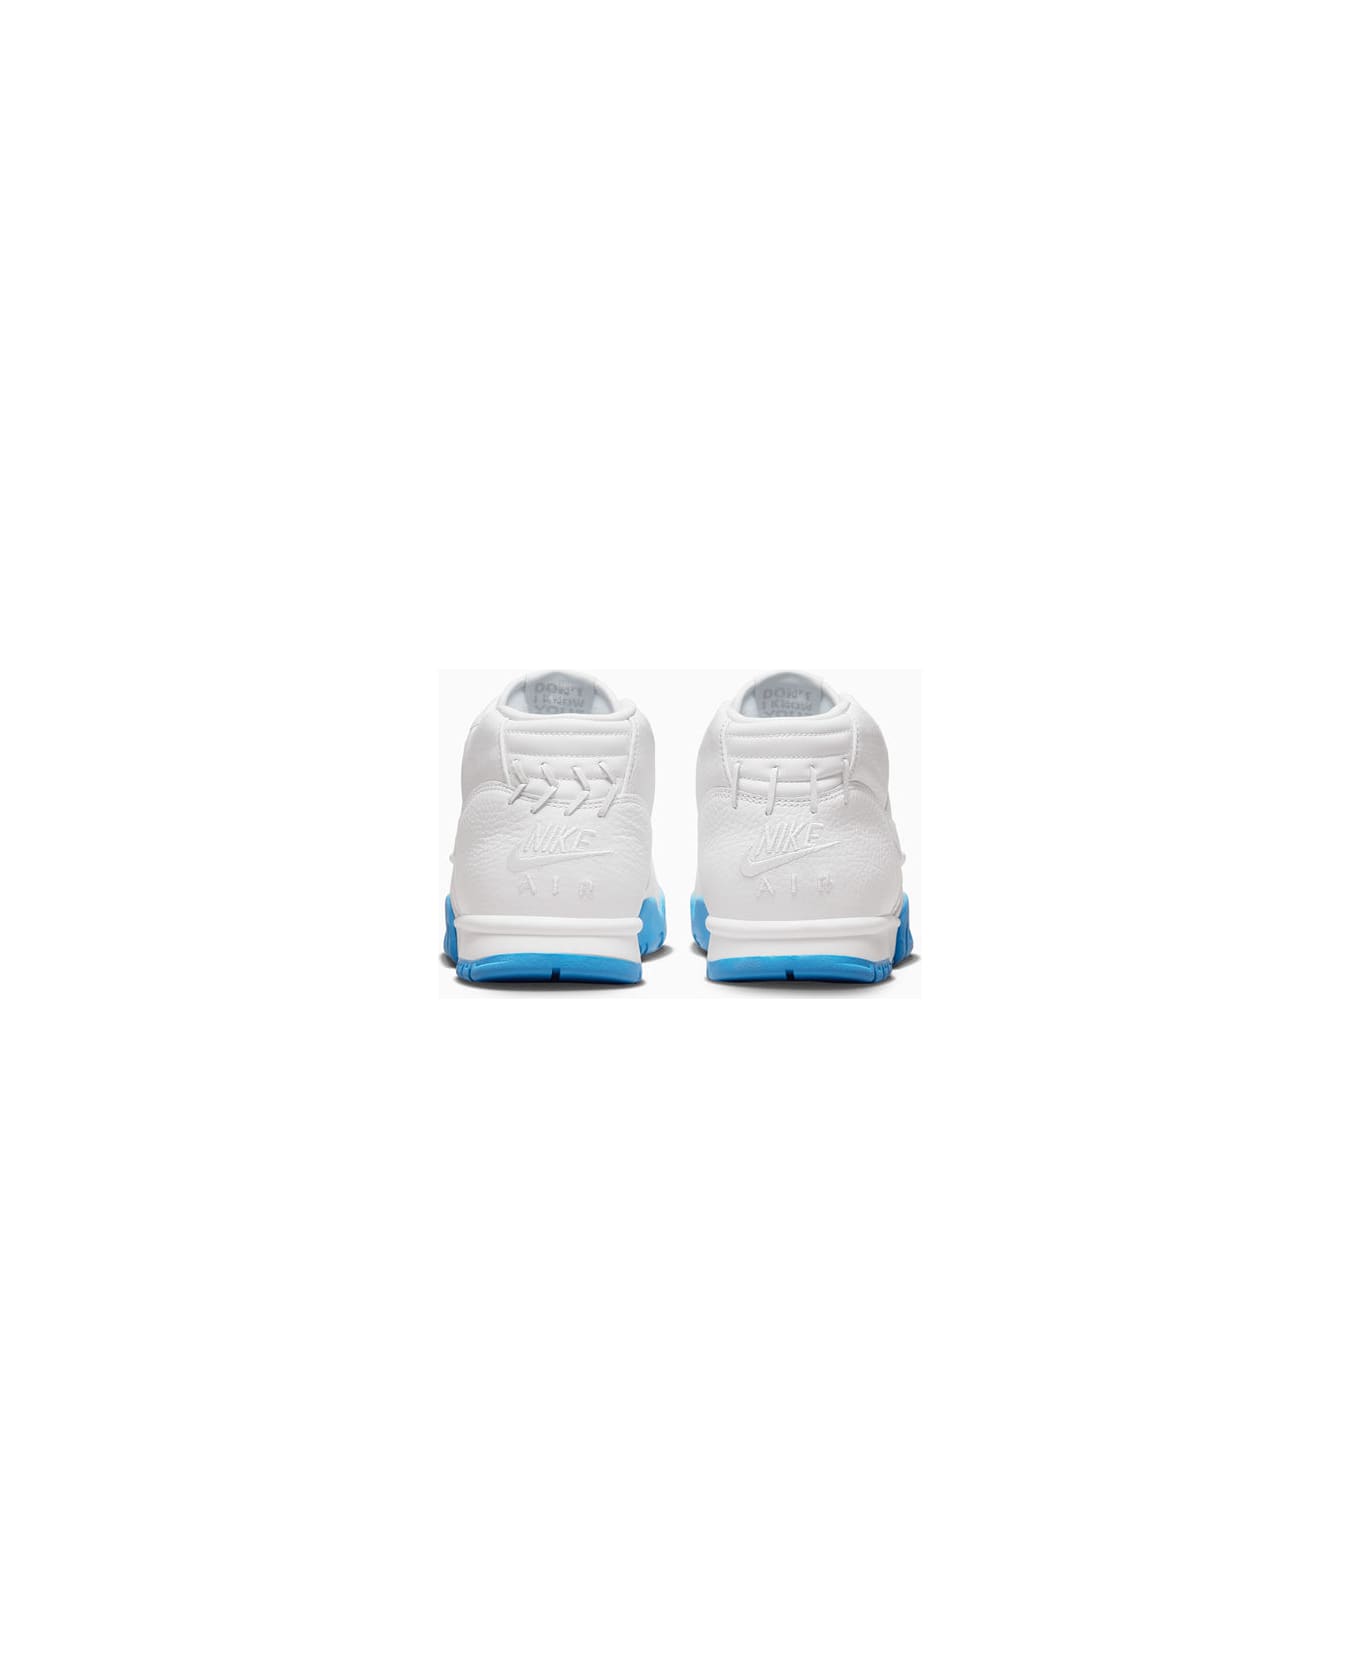 Nike Air Trainer 1 Sneakers Dr9997-100 - White